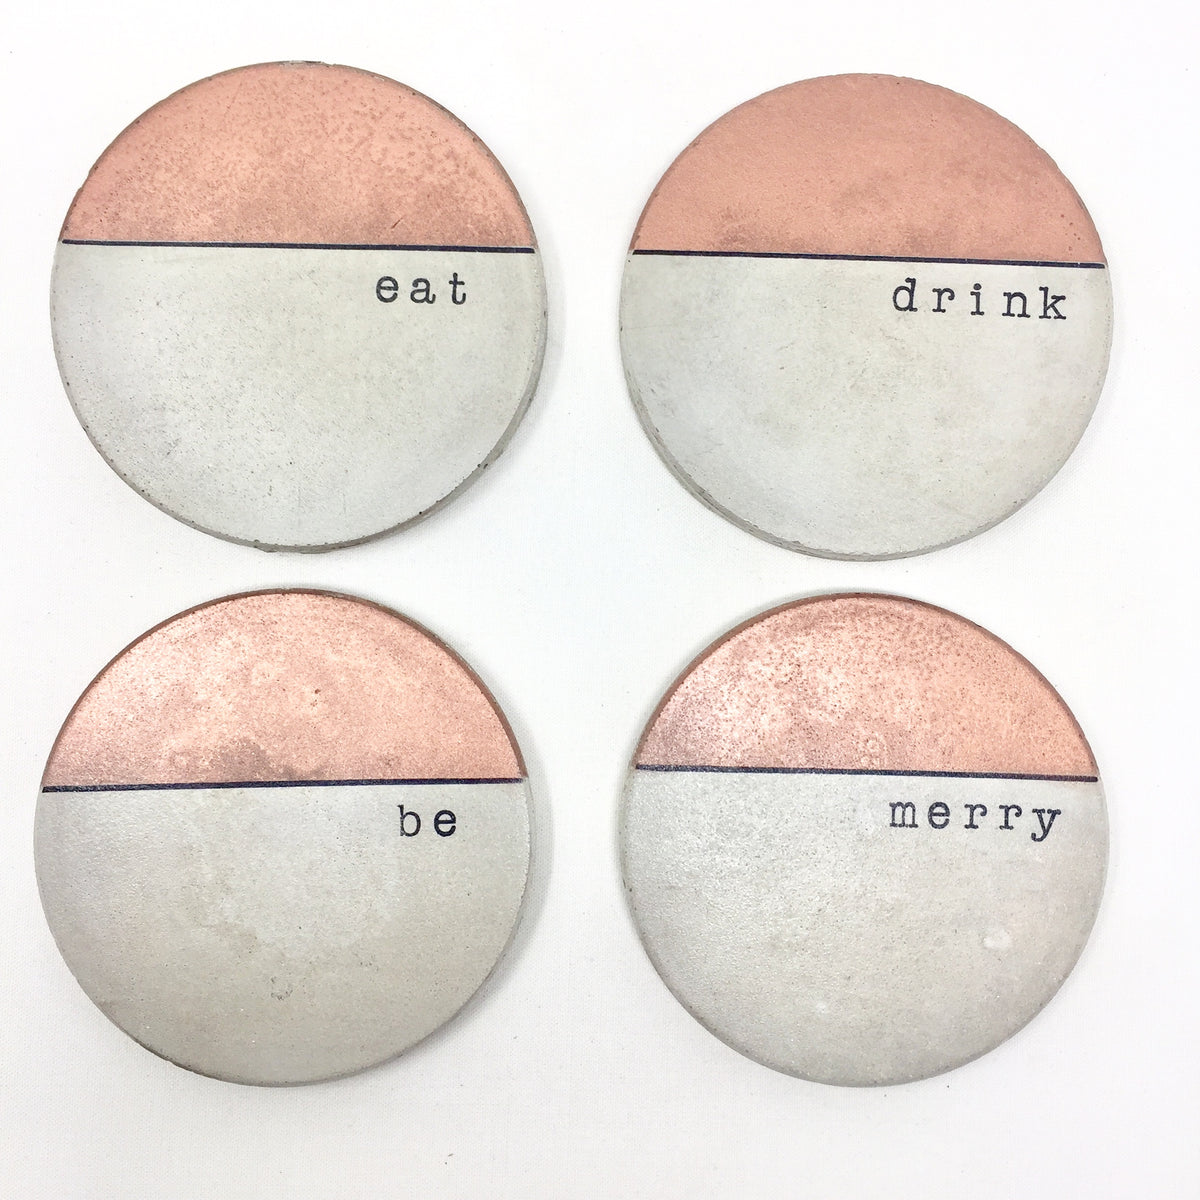 "Eat, Drink, Be Merry" Concrete Coasters